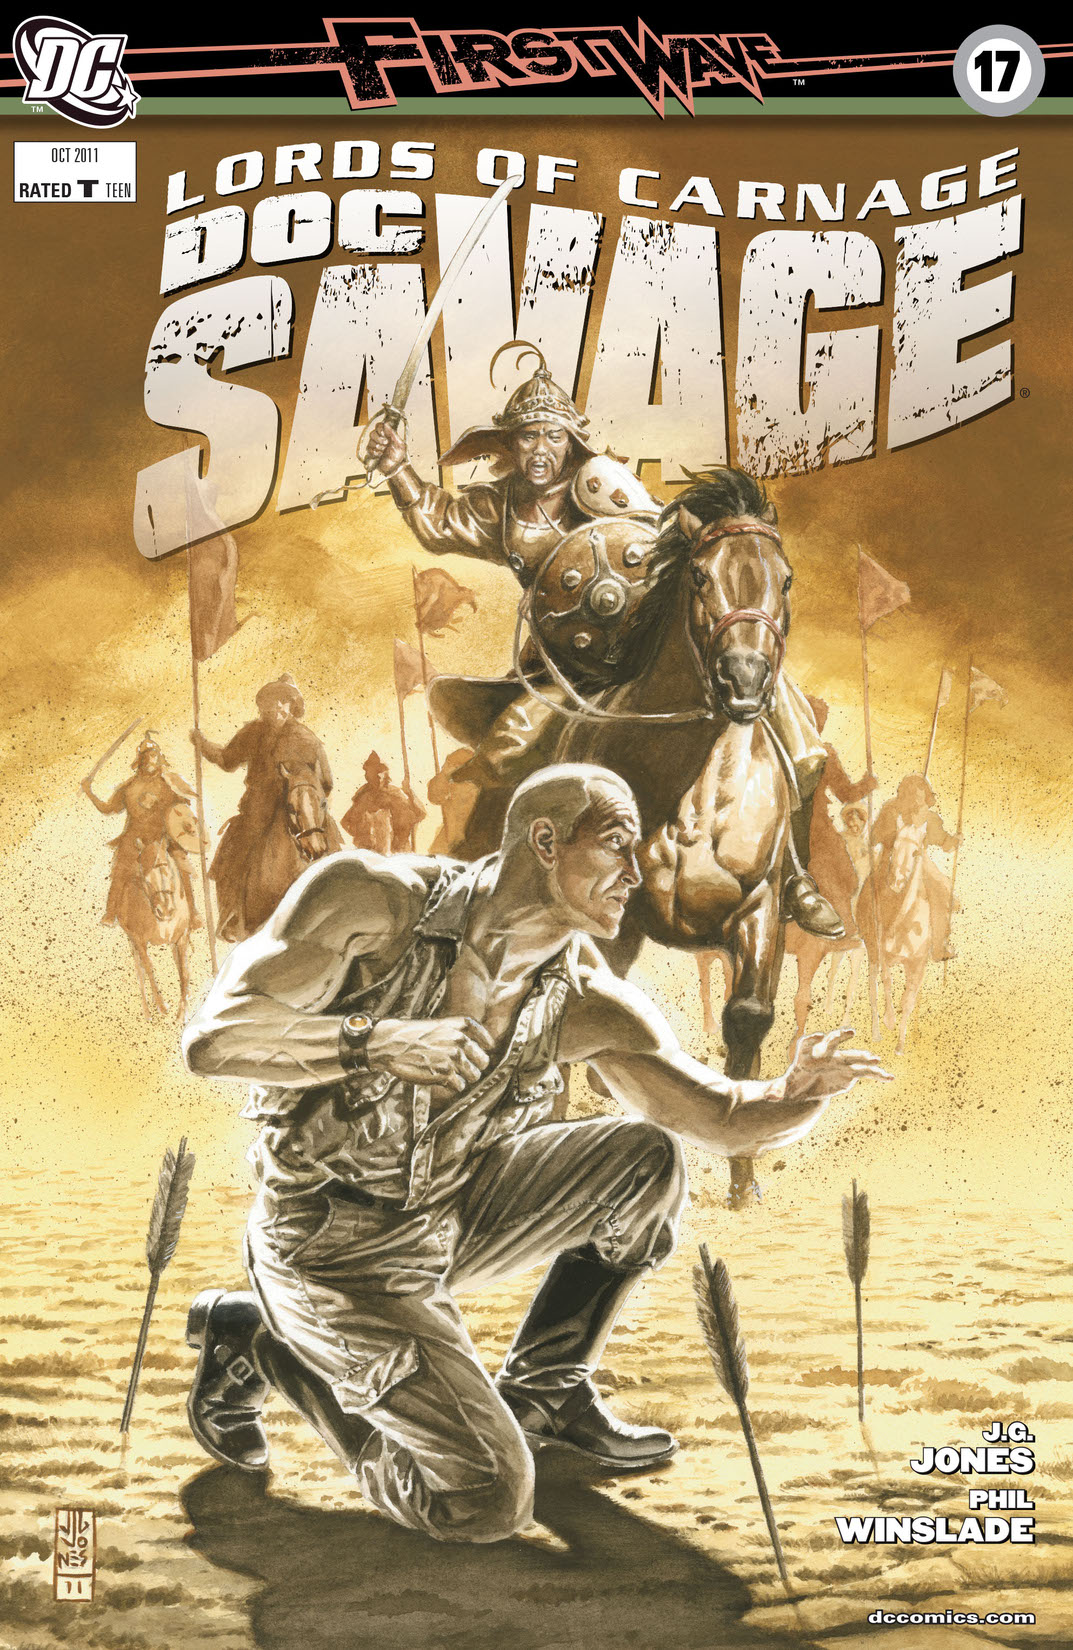 Doc Savage #17 preview images